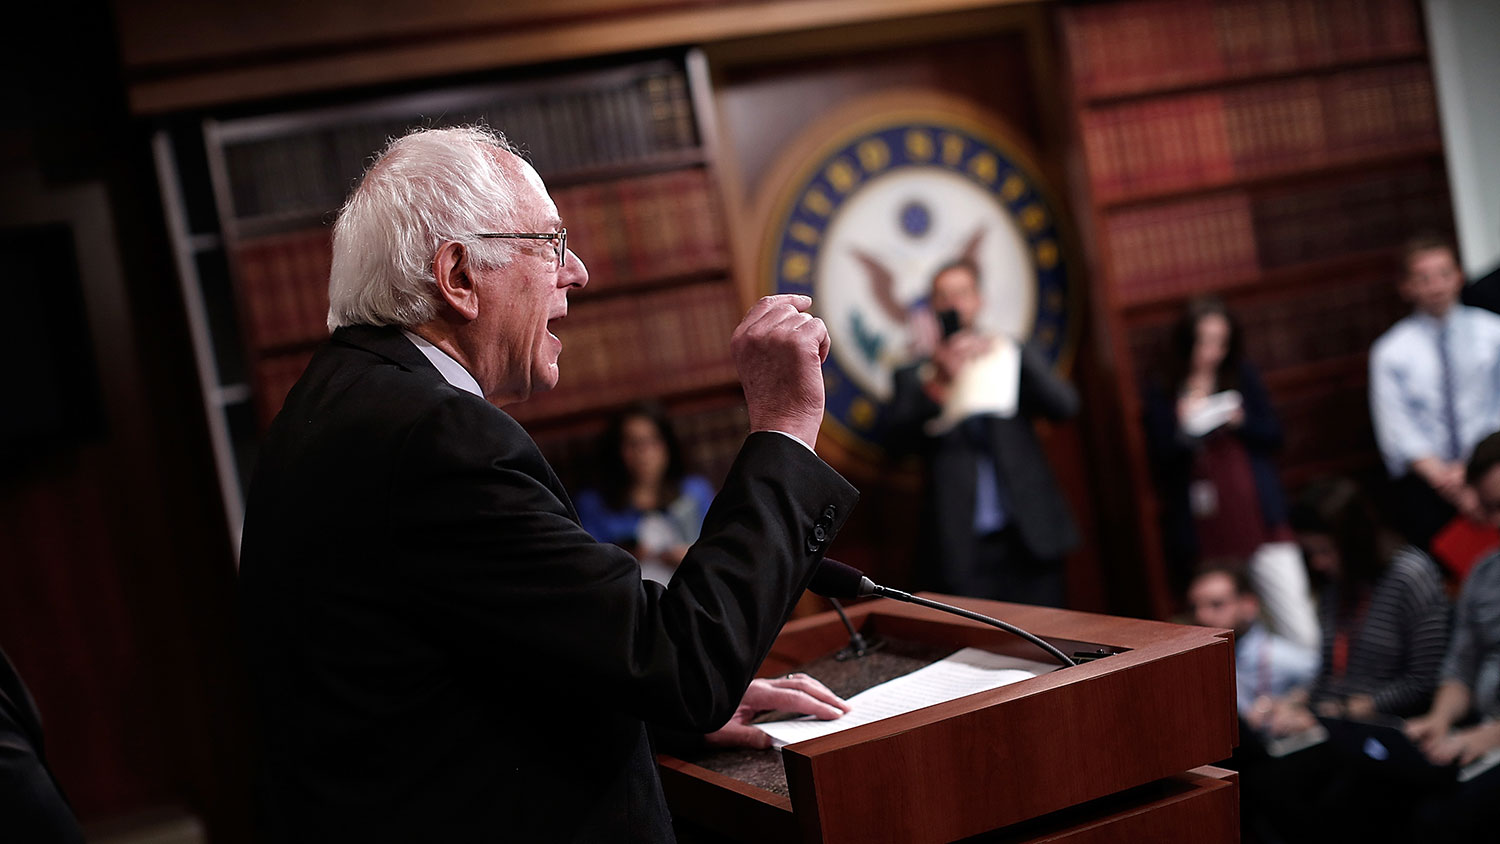 Democratic presidential candidate Sen. Bernie Sanders (I-VT) speaks at a press conference at the the U.S. Capitol May 6, 2015 in Washington, DC.
